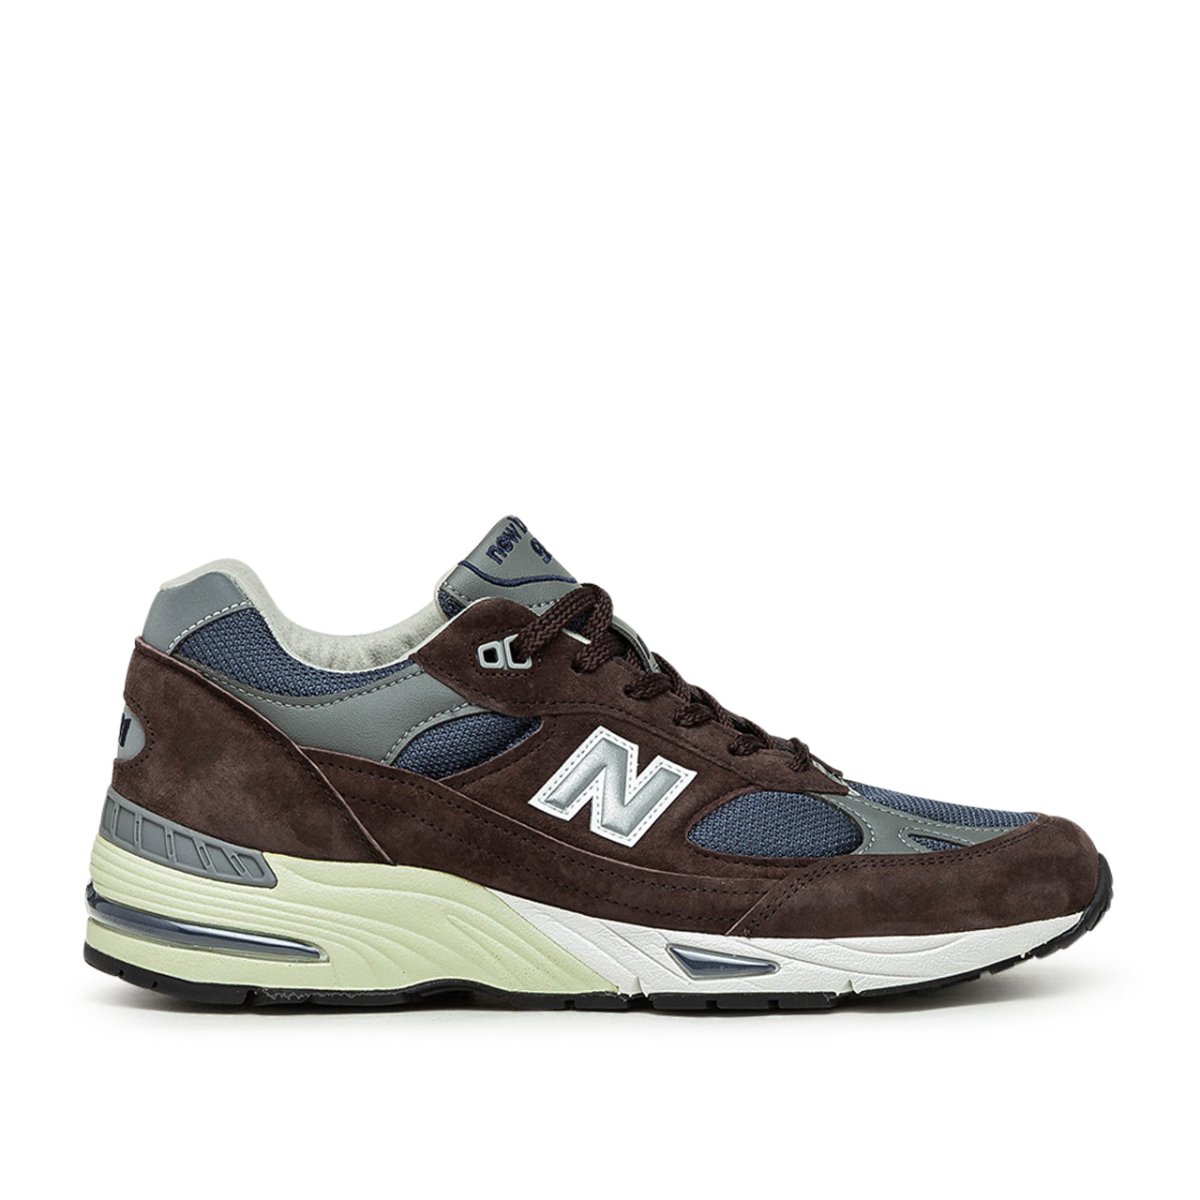 New Balance M991BNG 'Made in England' (Braun / Navy)  - Allike Store